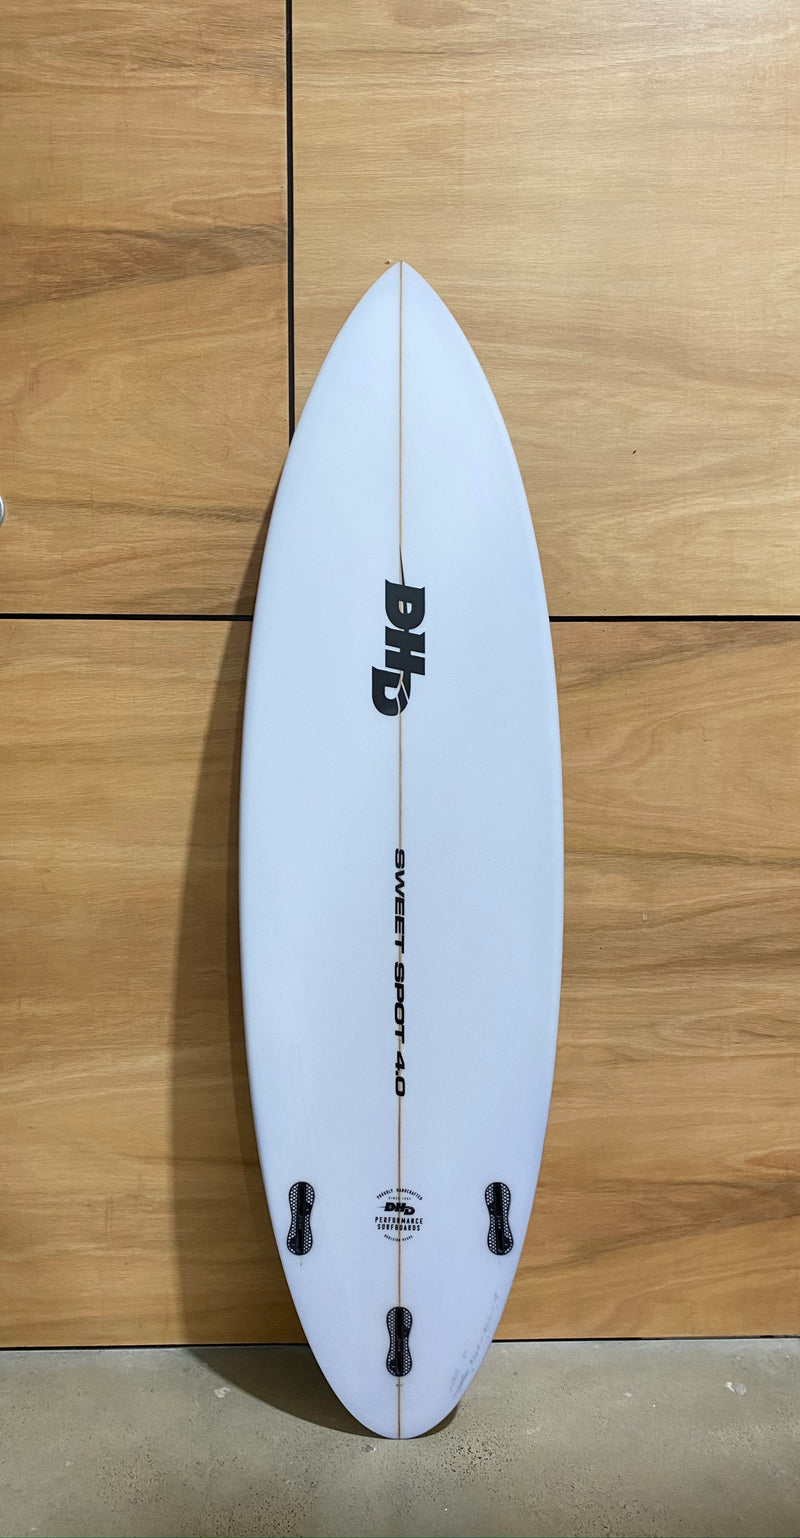 DHD Sweetspot 4.0 - Board Store DHDSurfboard  